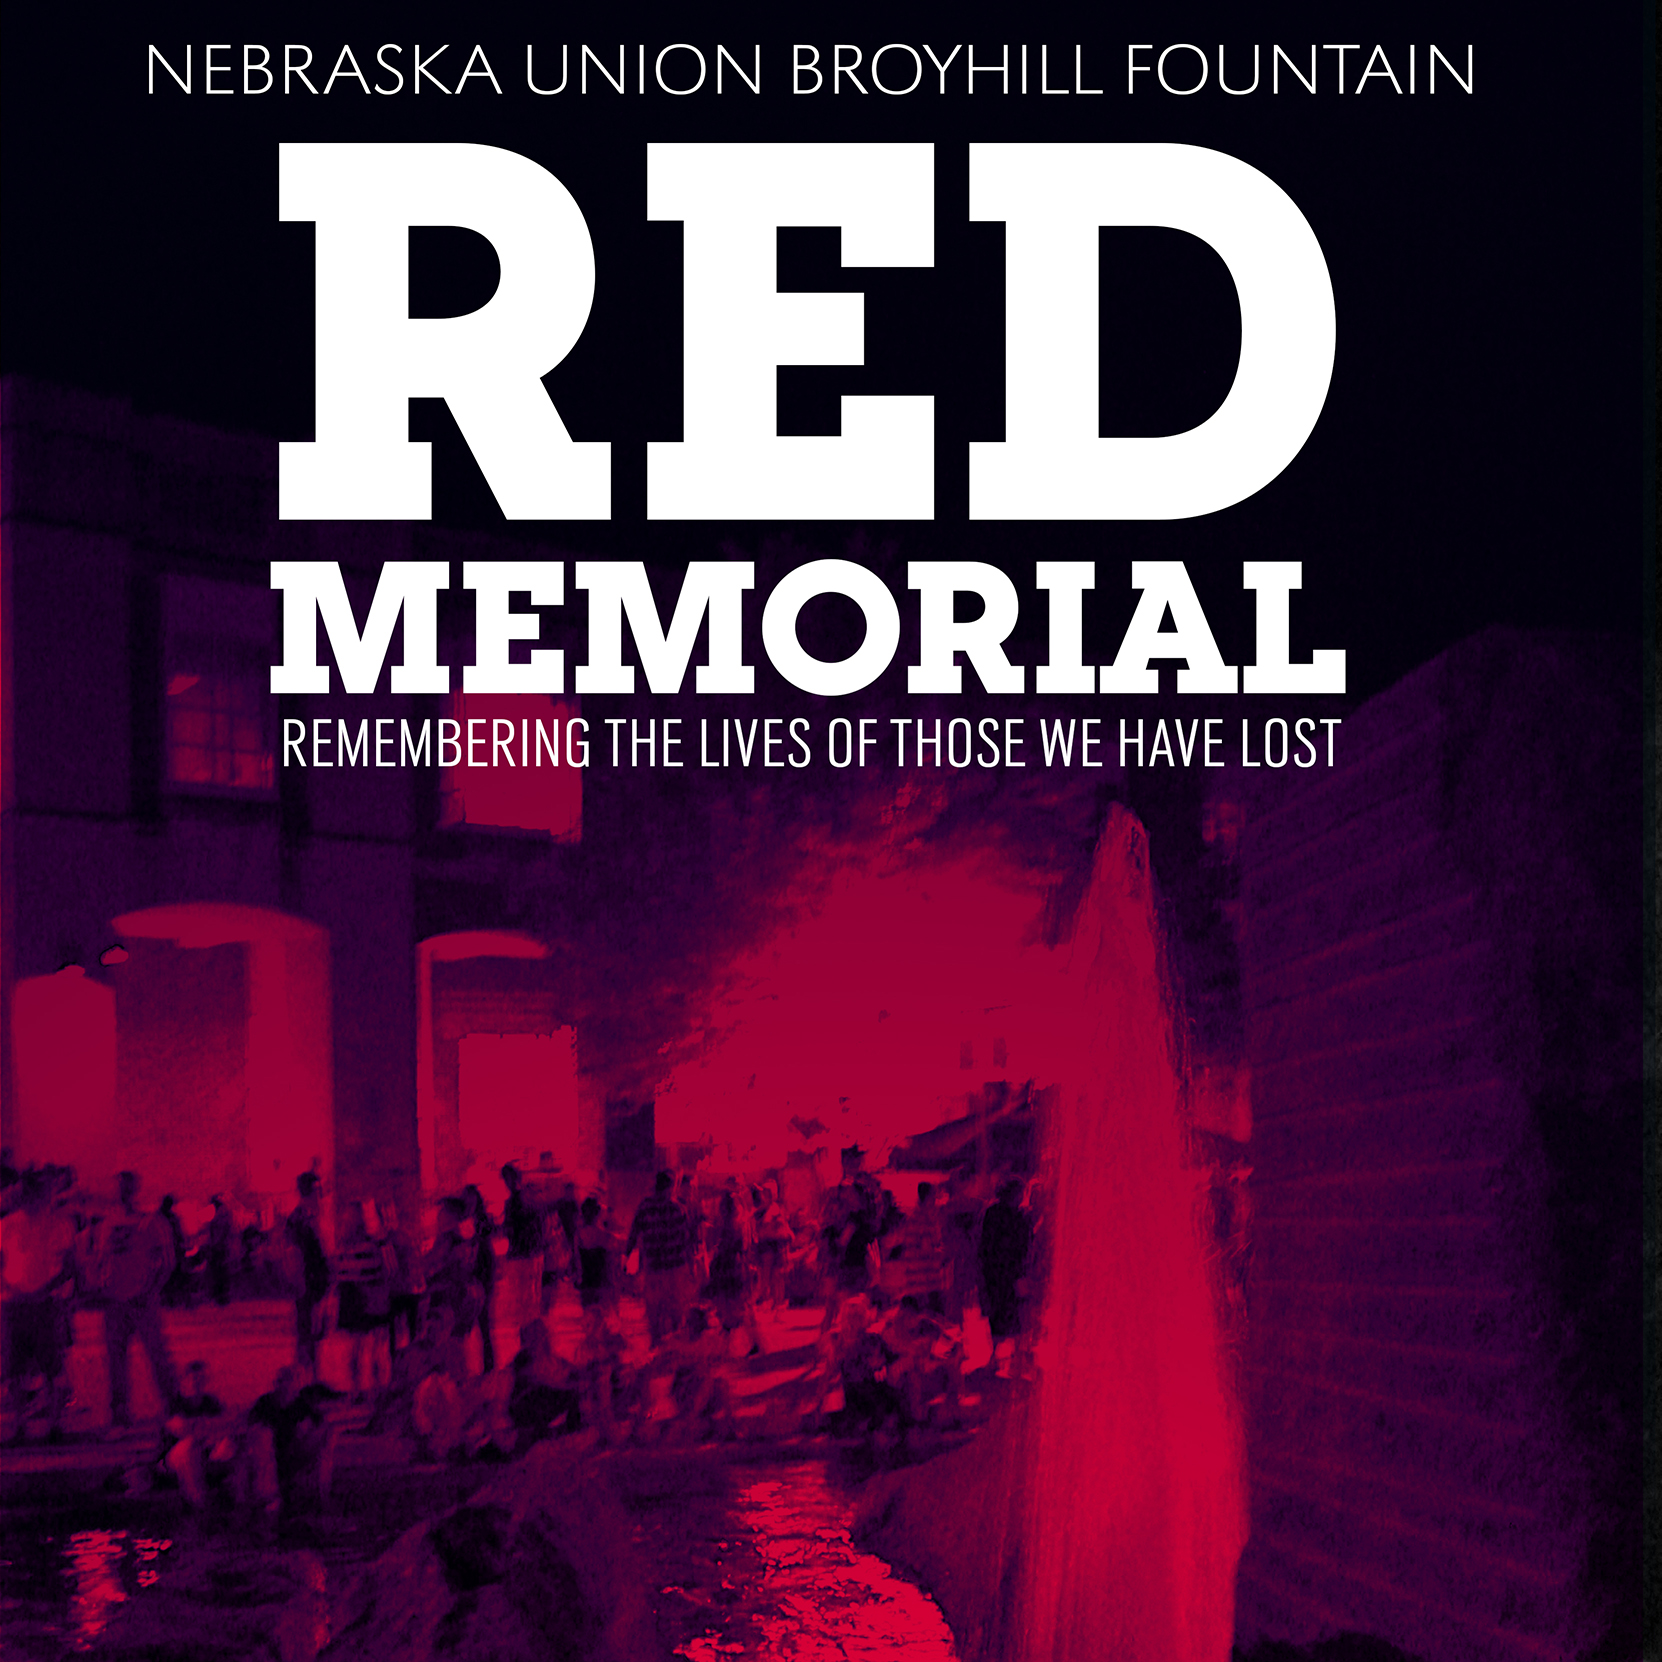 Since 2015 Red Memorial has celebrated the lives of deceased Huskers.